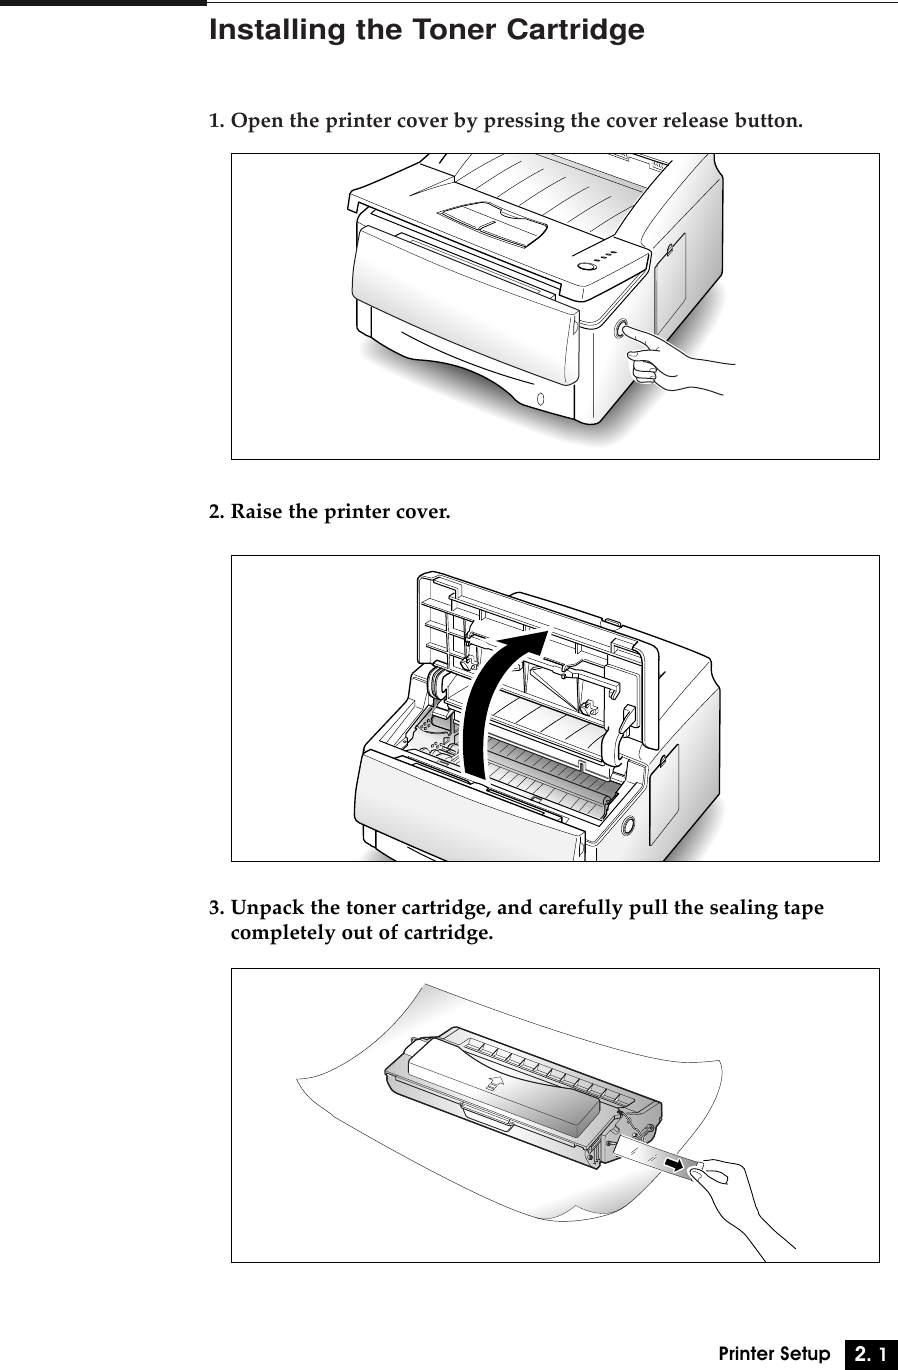 2. 1Printer SetupInstalling the Toner Cartridge1. Open the printer cover by pressing the cover release button.2. Raise the printer cover.3. Unpack the toner cartridge, and carefully pull the sealing tape completely out of cartridge.